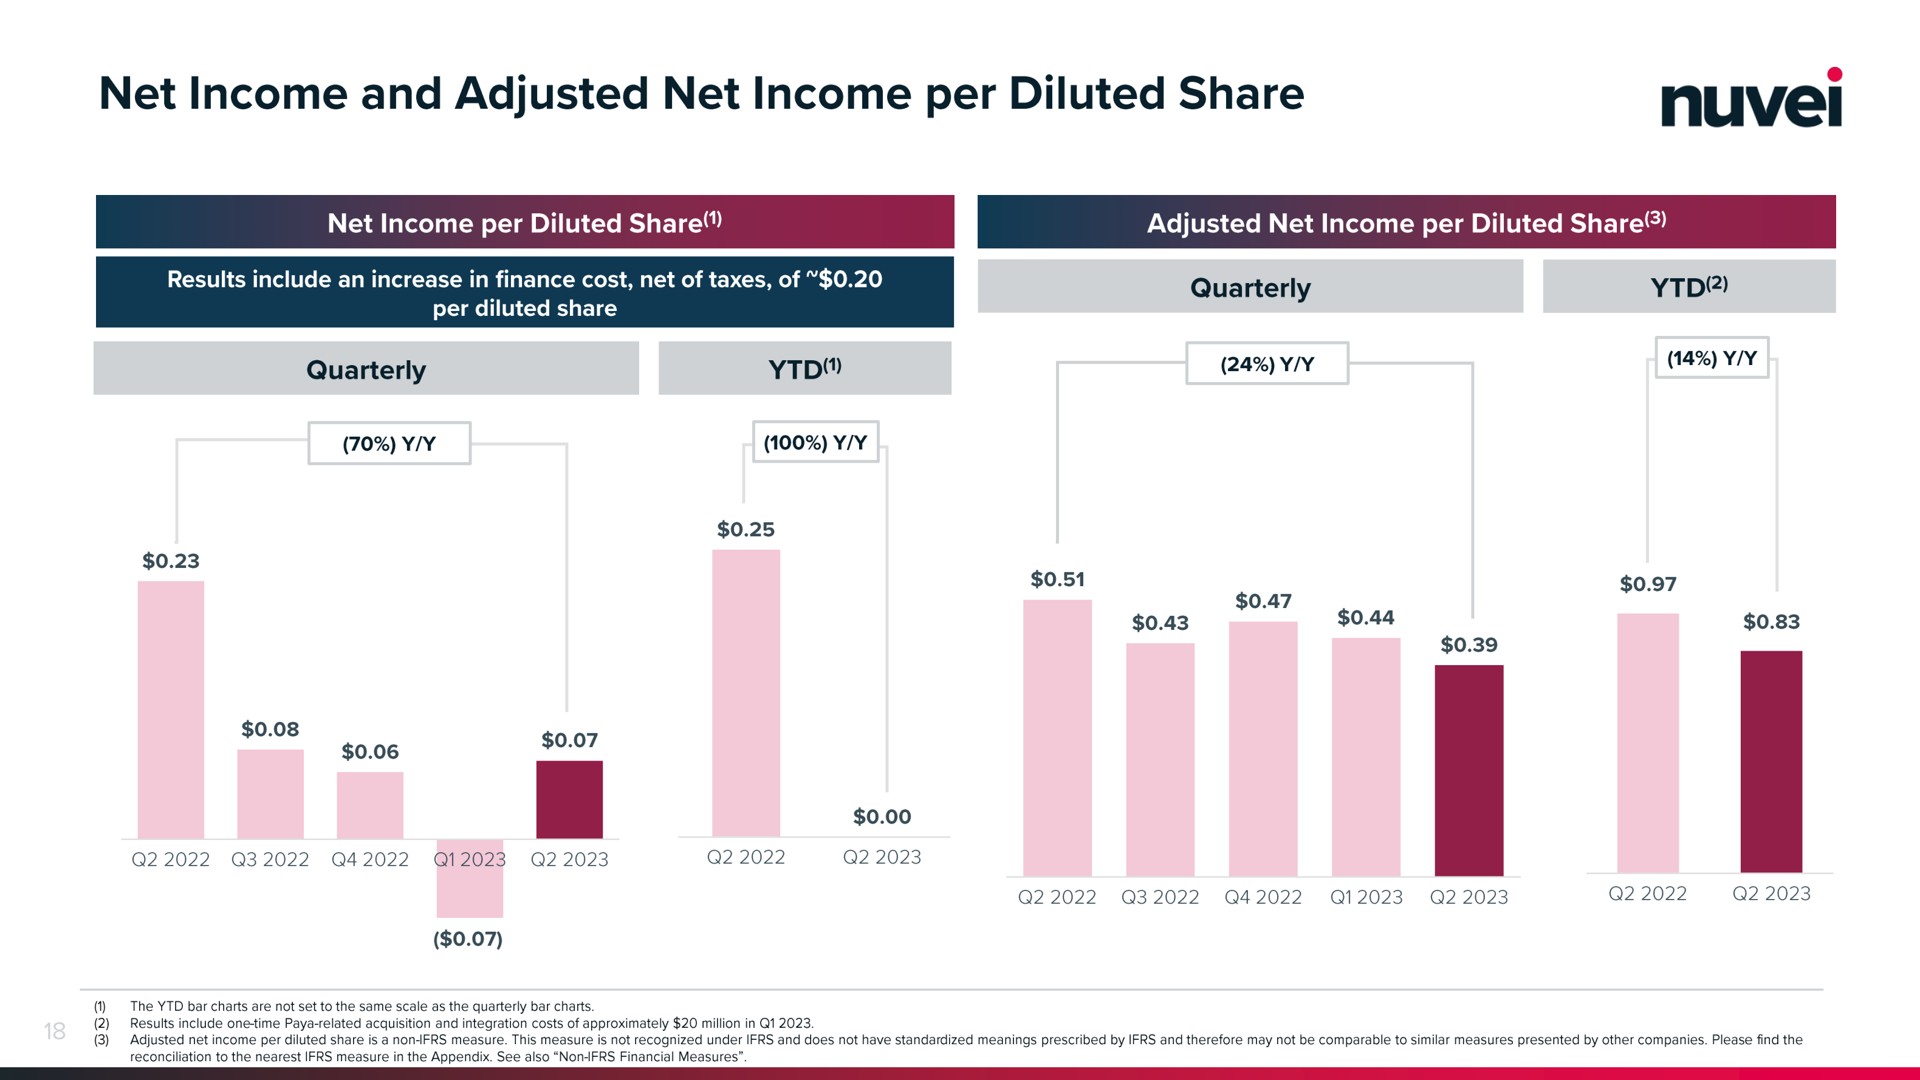 net income and adjusted net income per diluted share | Nuvei